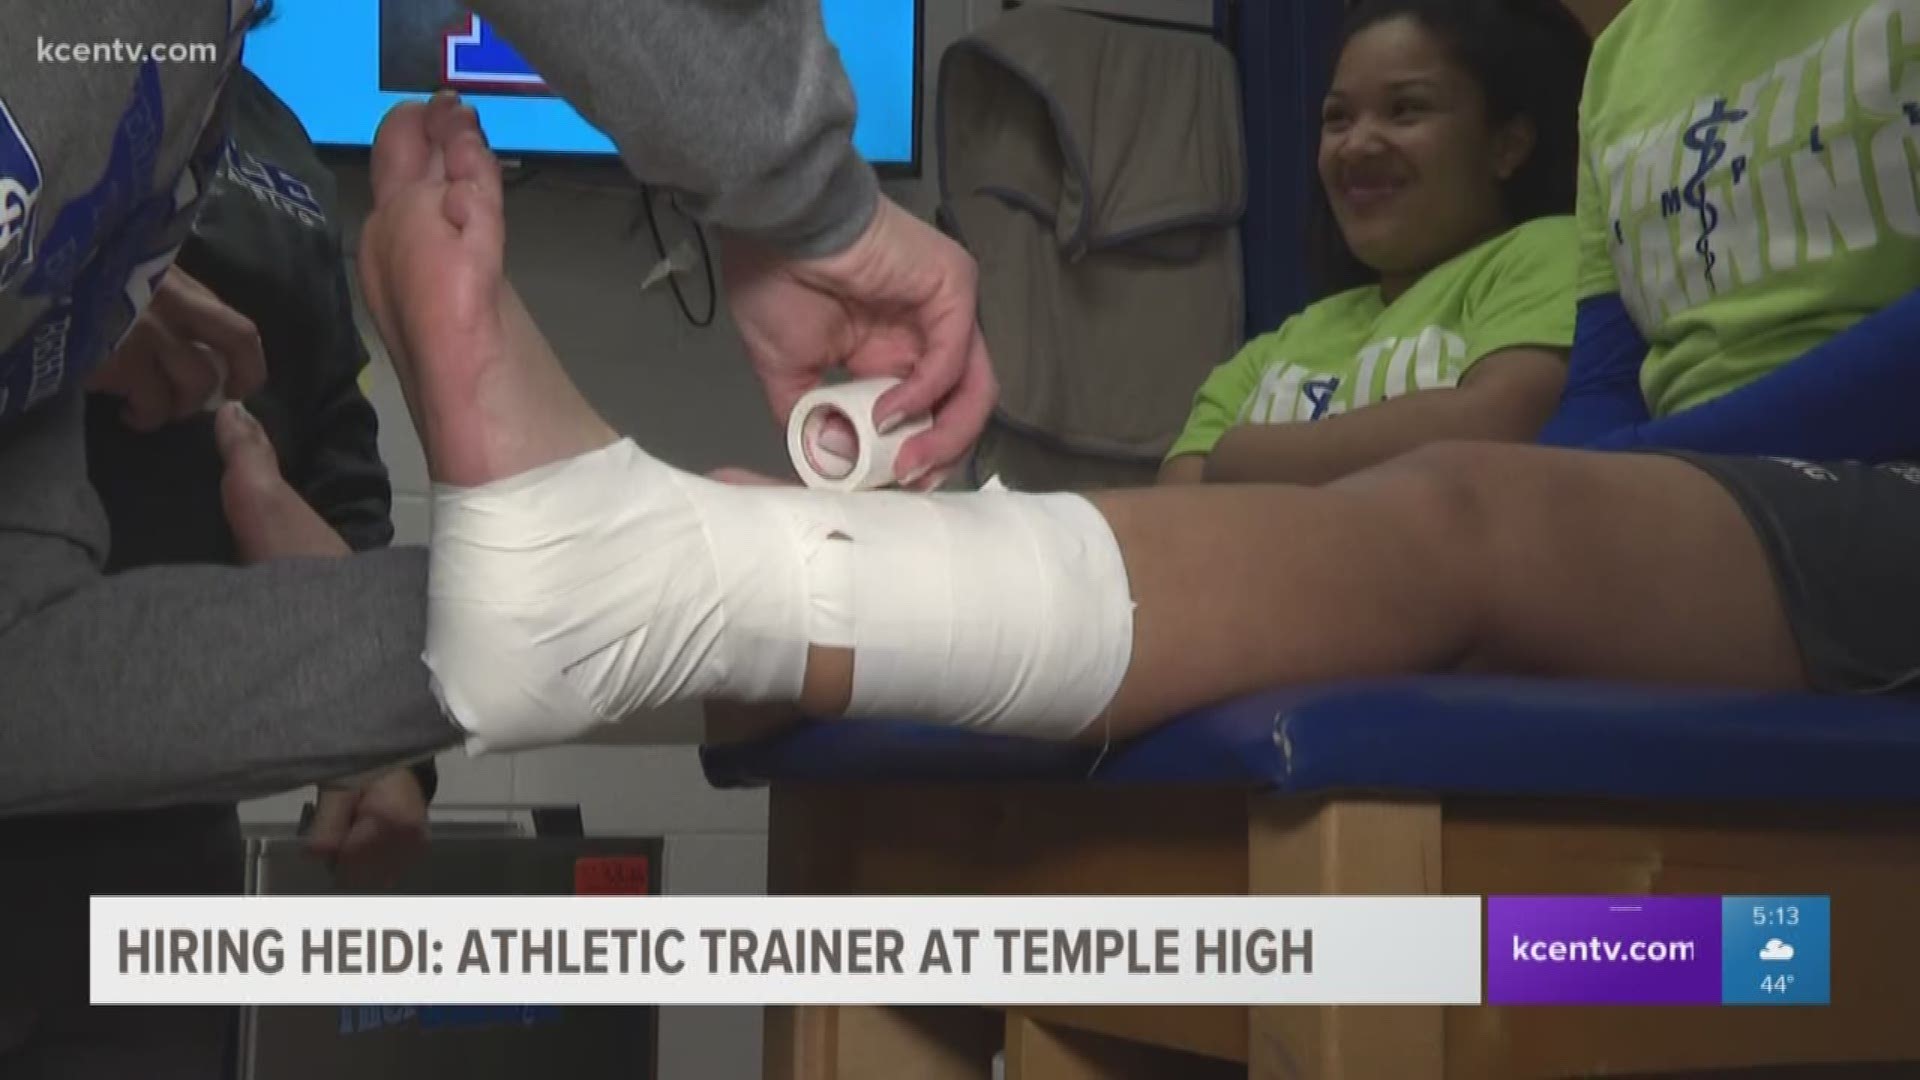 Heidi went to Temple High to see if she has what it takes to be an athletic trainer.